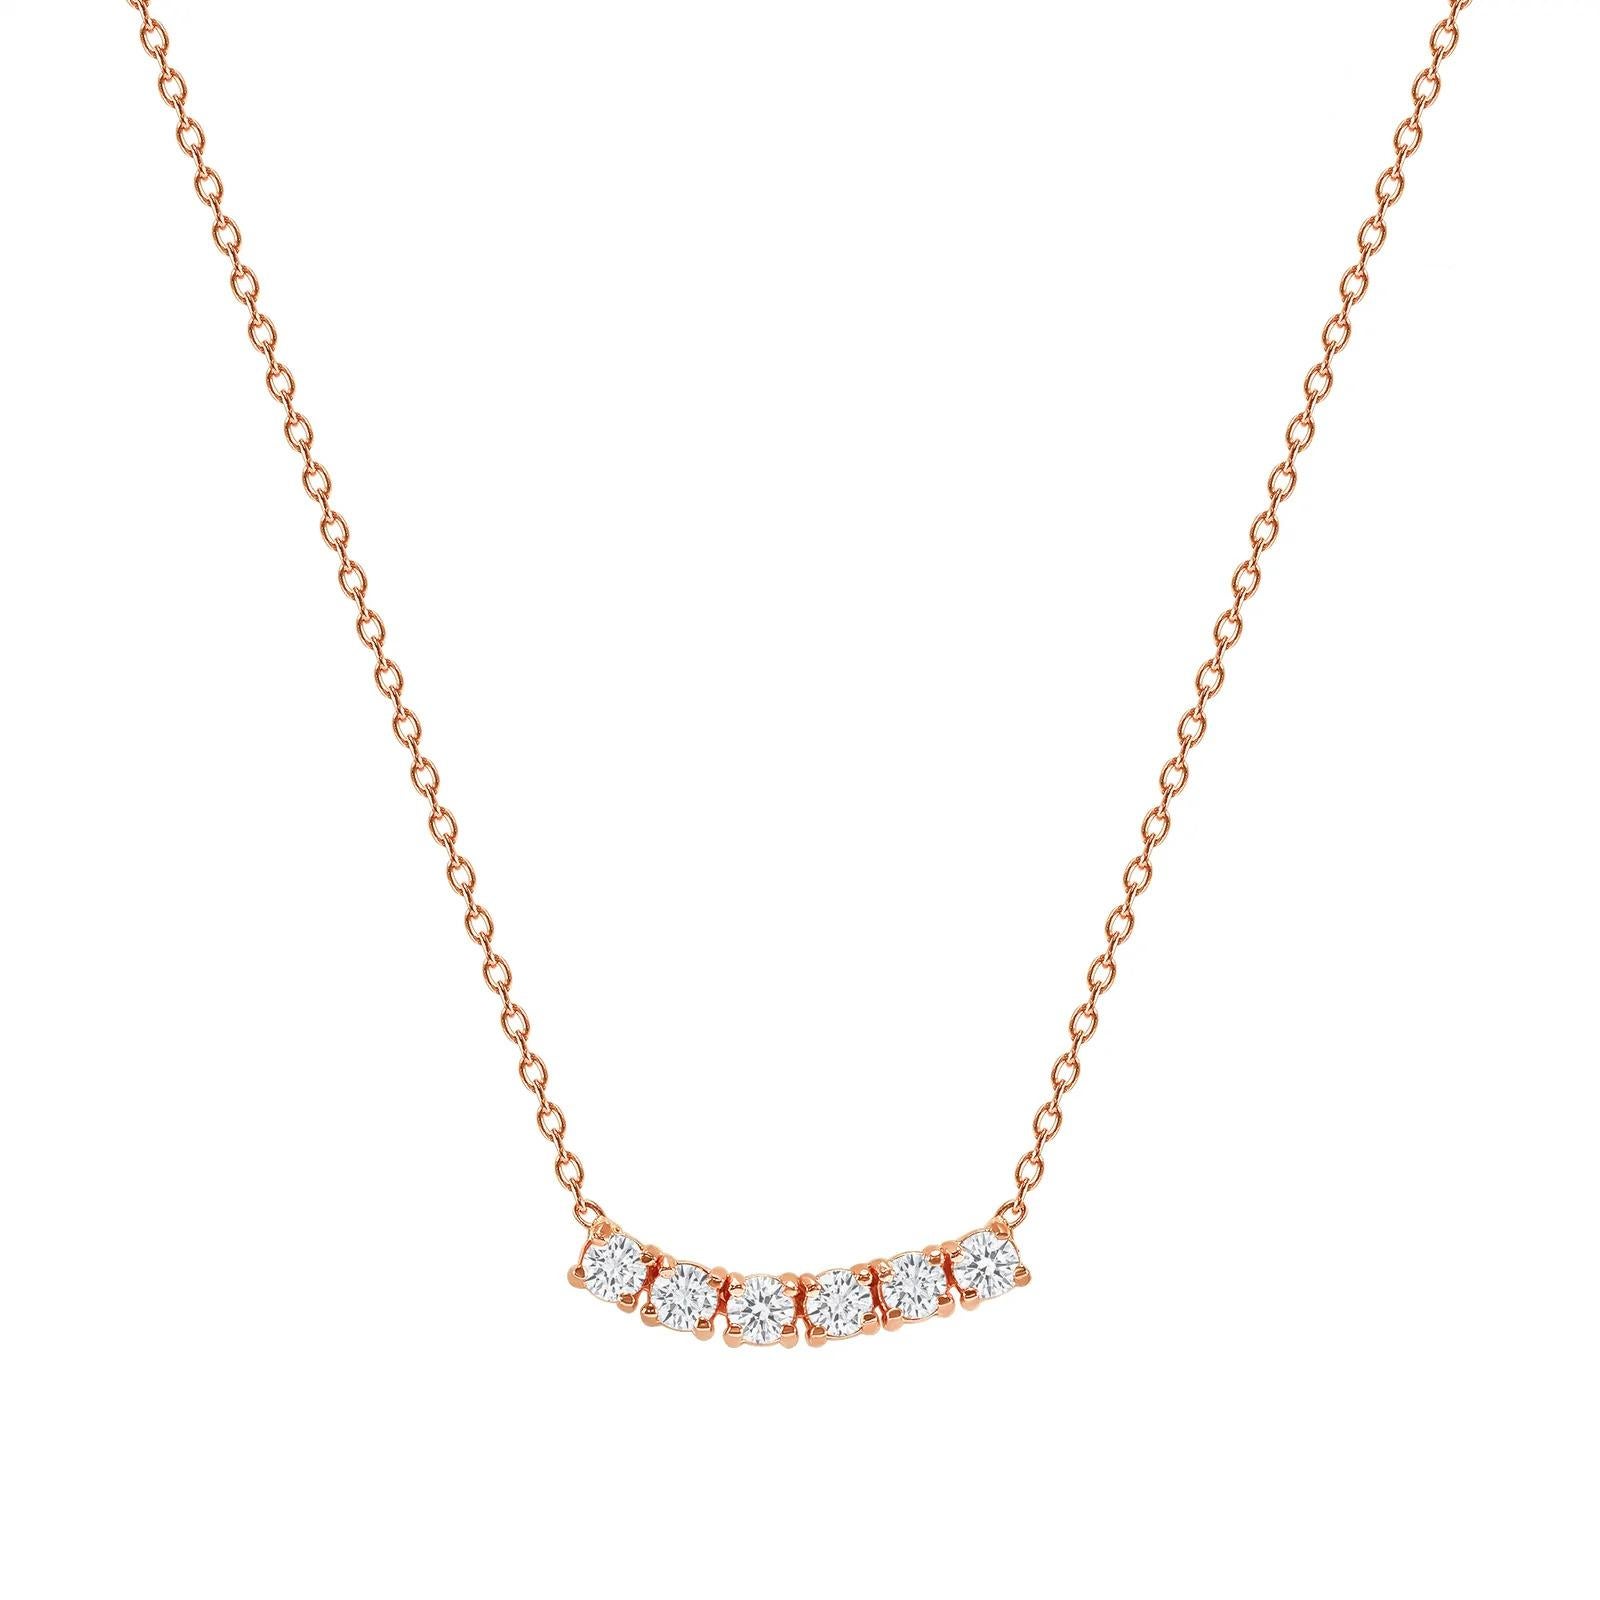 This petite, curved diamond necklace is crafted with gorgeous 14k gold set with six round diamonds.  

Gold: 14k 
Diamond Total Carats: 0.25 ct
Diamond Cut: Round (6 diamonds)
Diamond Clarity: VS
Diamond Color: F
Color: Rose Gold
Necklace Length: 22